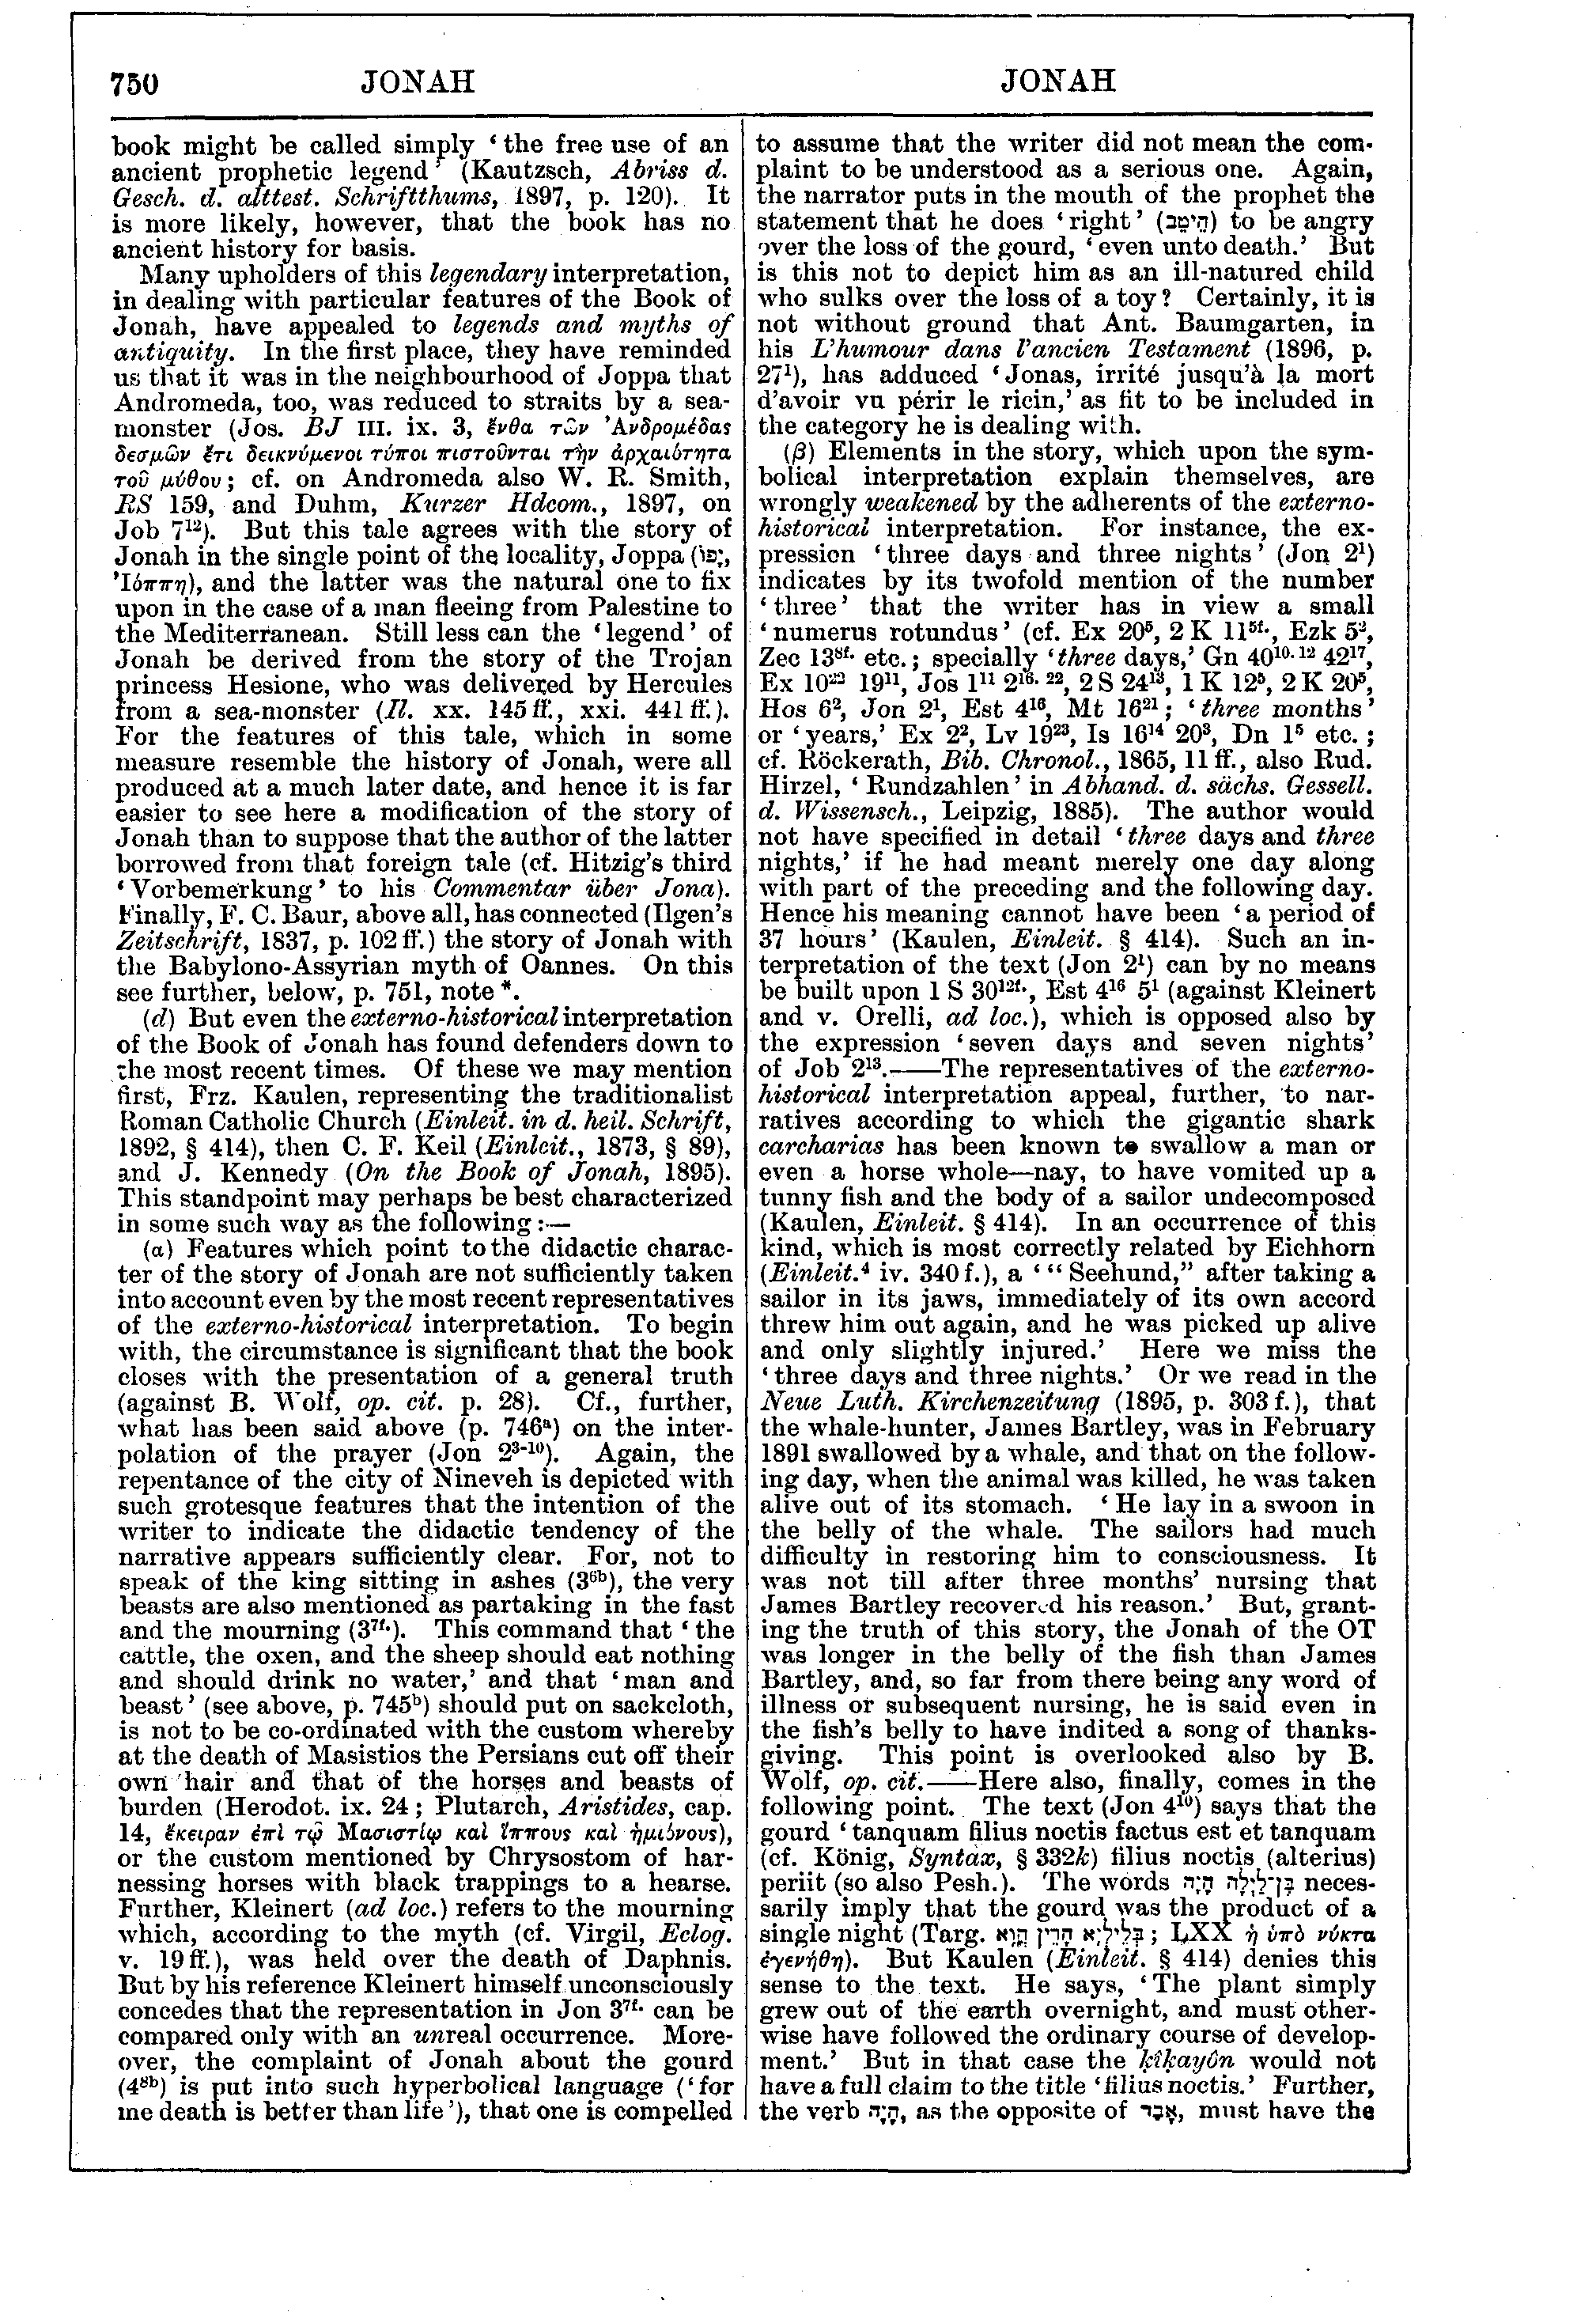 Image of page 750